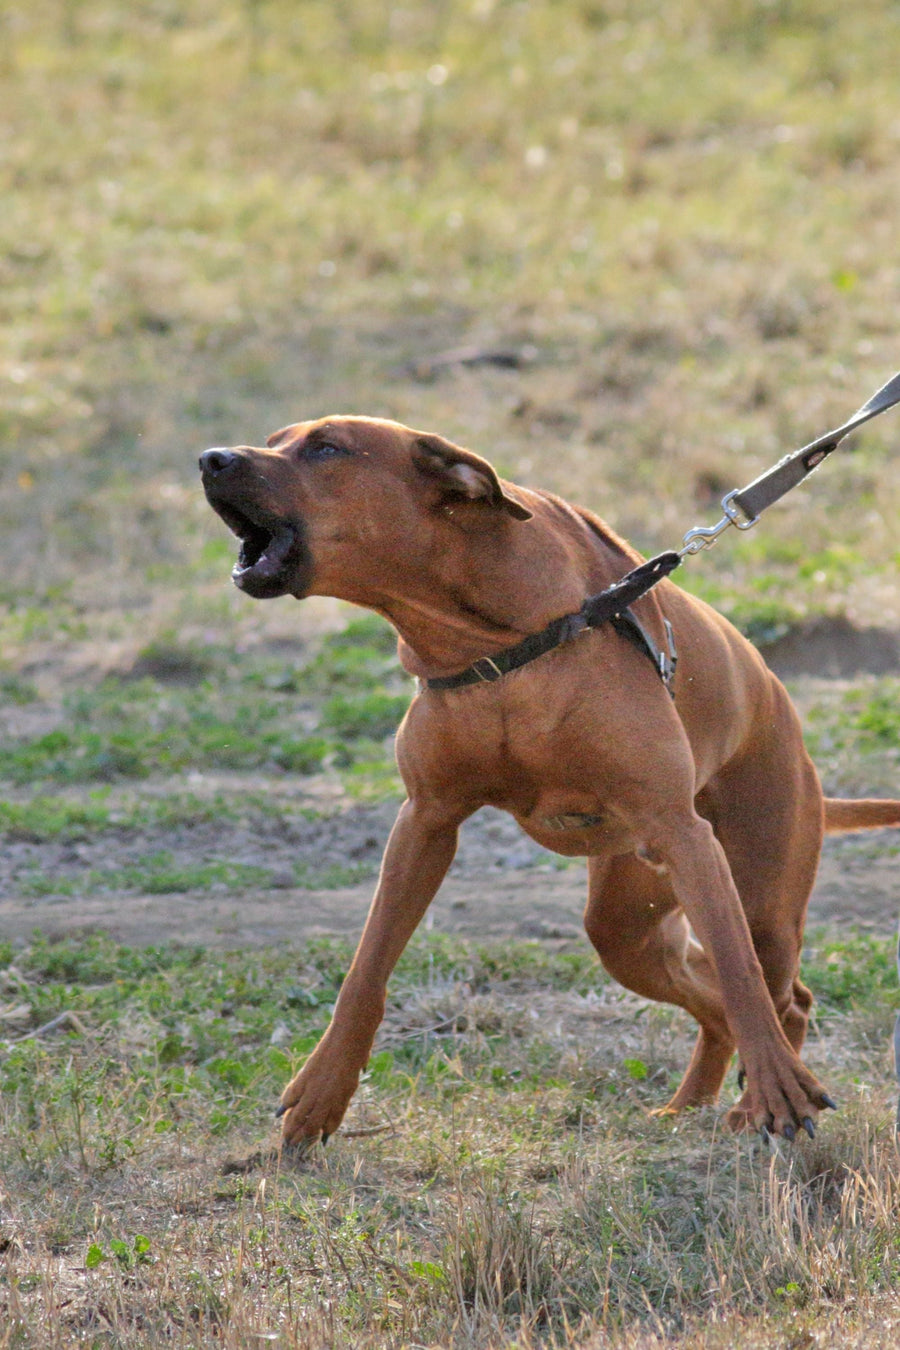 large brown reactive dog lunging and pulling on the leash, barking at an unseen trigger.